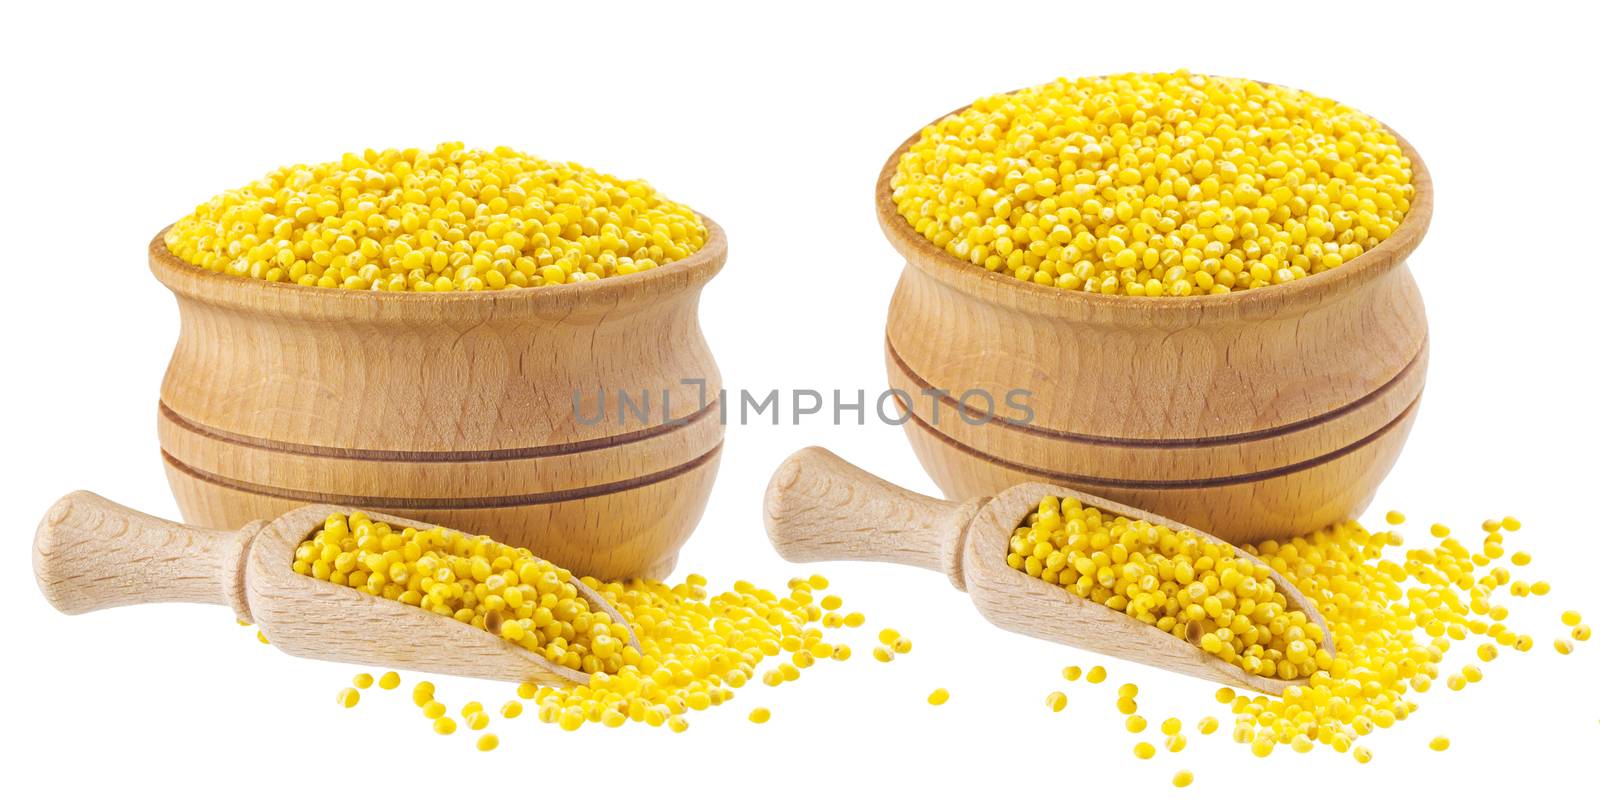 Isolated millet seeds. Wooden bowl and scoop with millet groats on white background. Close-up by xamtiw